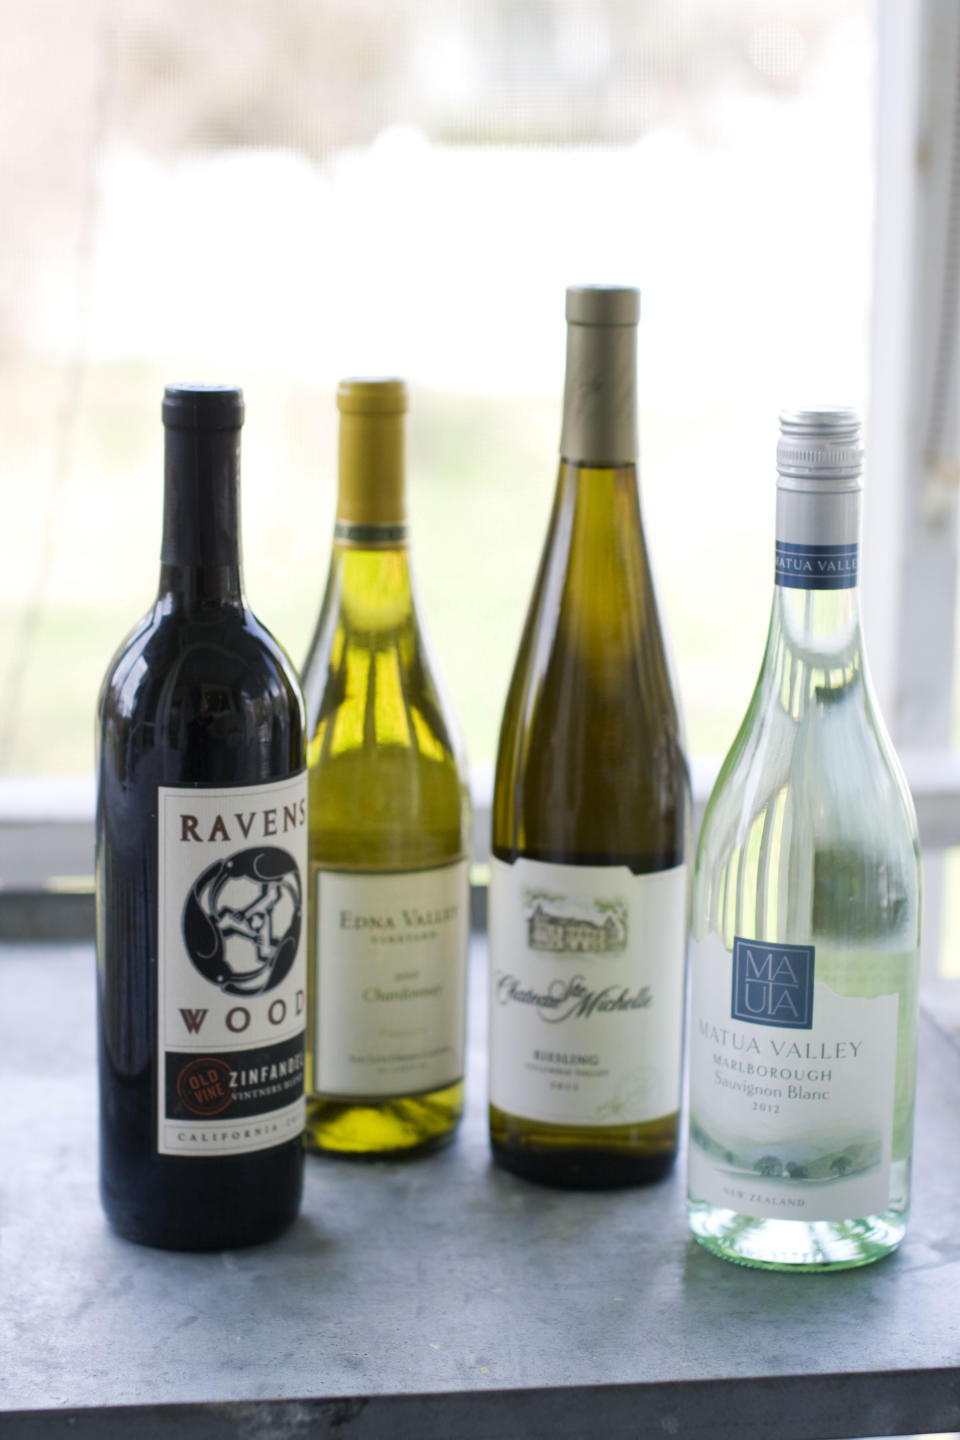 This image taken on April 29, 2013 shows, from left, Ravenswood Zinfandel, Edna Valley Chardonnay, Chateau St. Michelle Eroica Riesling and Matua Valley Sauvignon Blanc wines in Concord, N.H. (AP Photo/Matthew Mead)